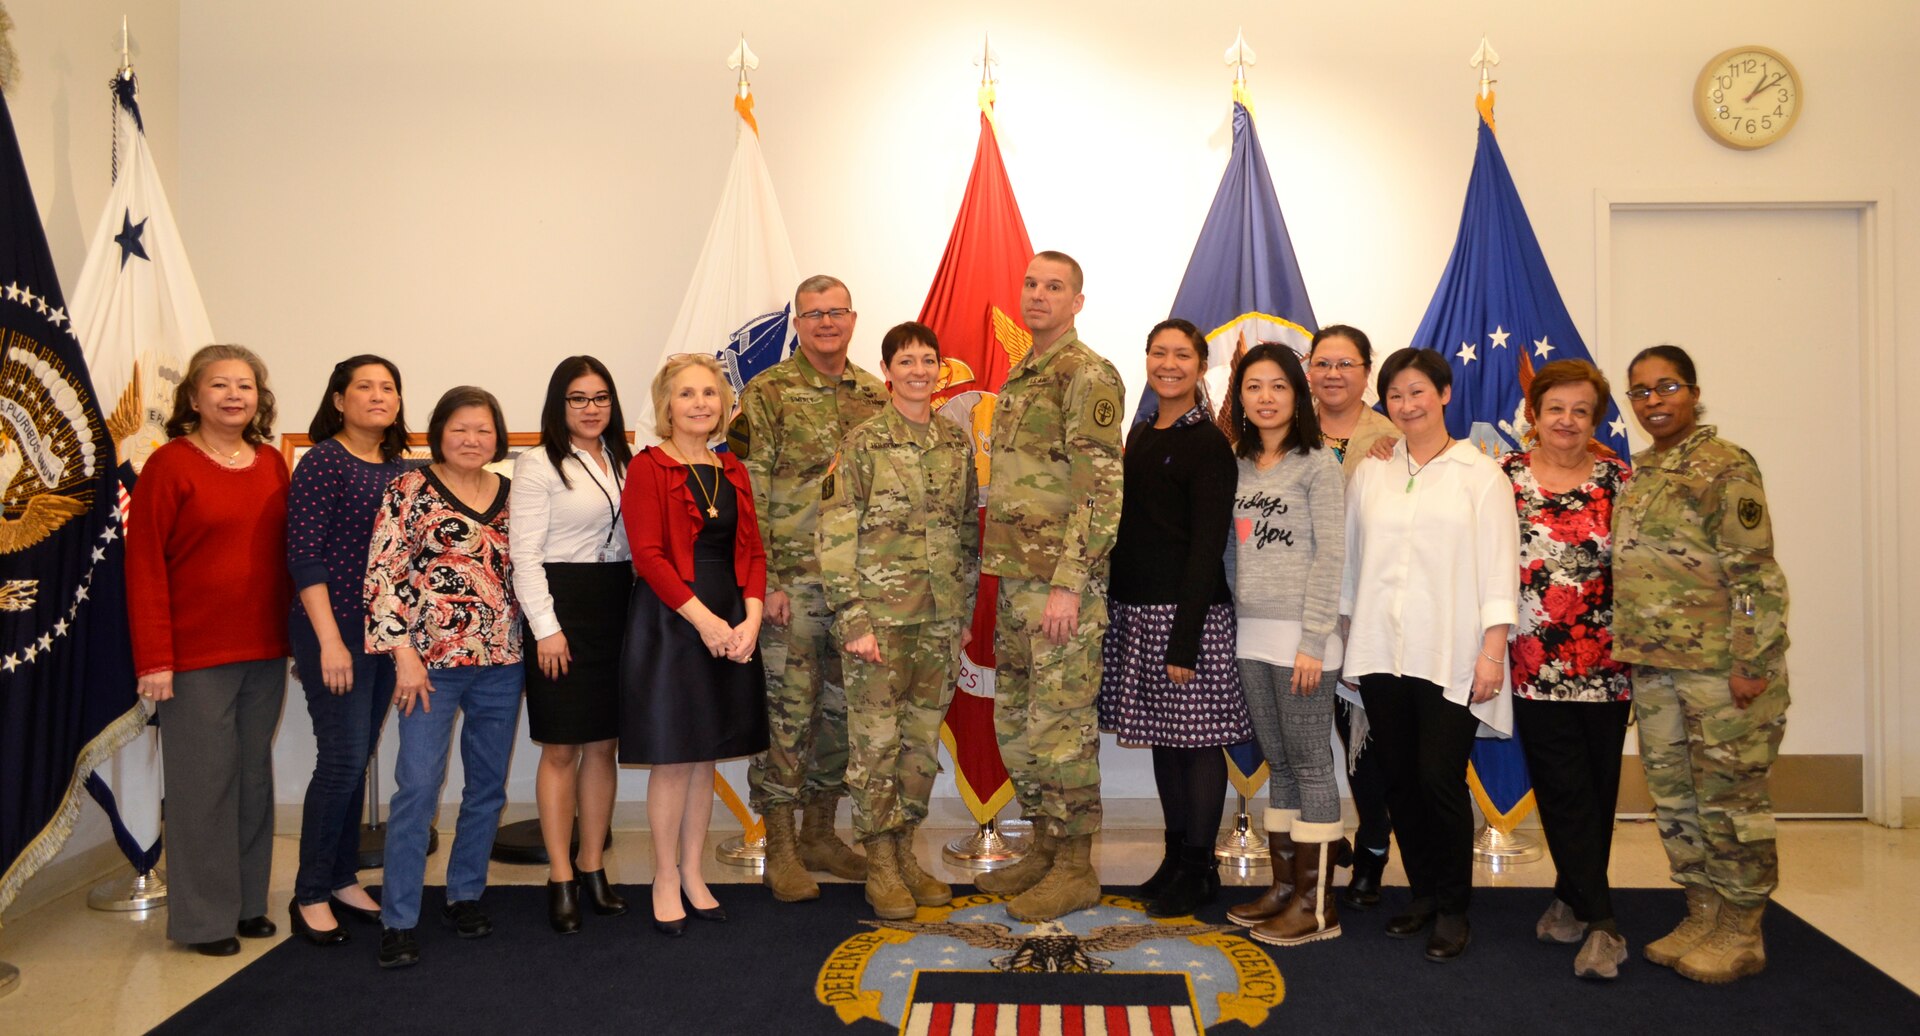 Army Maj. Gen. Barbara Holcomb, U.S. Army Medical Research and Material Command commanding general, left center, and Command Sgt. Maj. David Rogers, right center, pose with Brig. Gen. Mark Simerly, DLA Troop Support commander, and the flag room staff at DLA Troop Support, March 16, 2018, in Philadelphia.